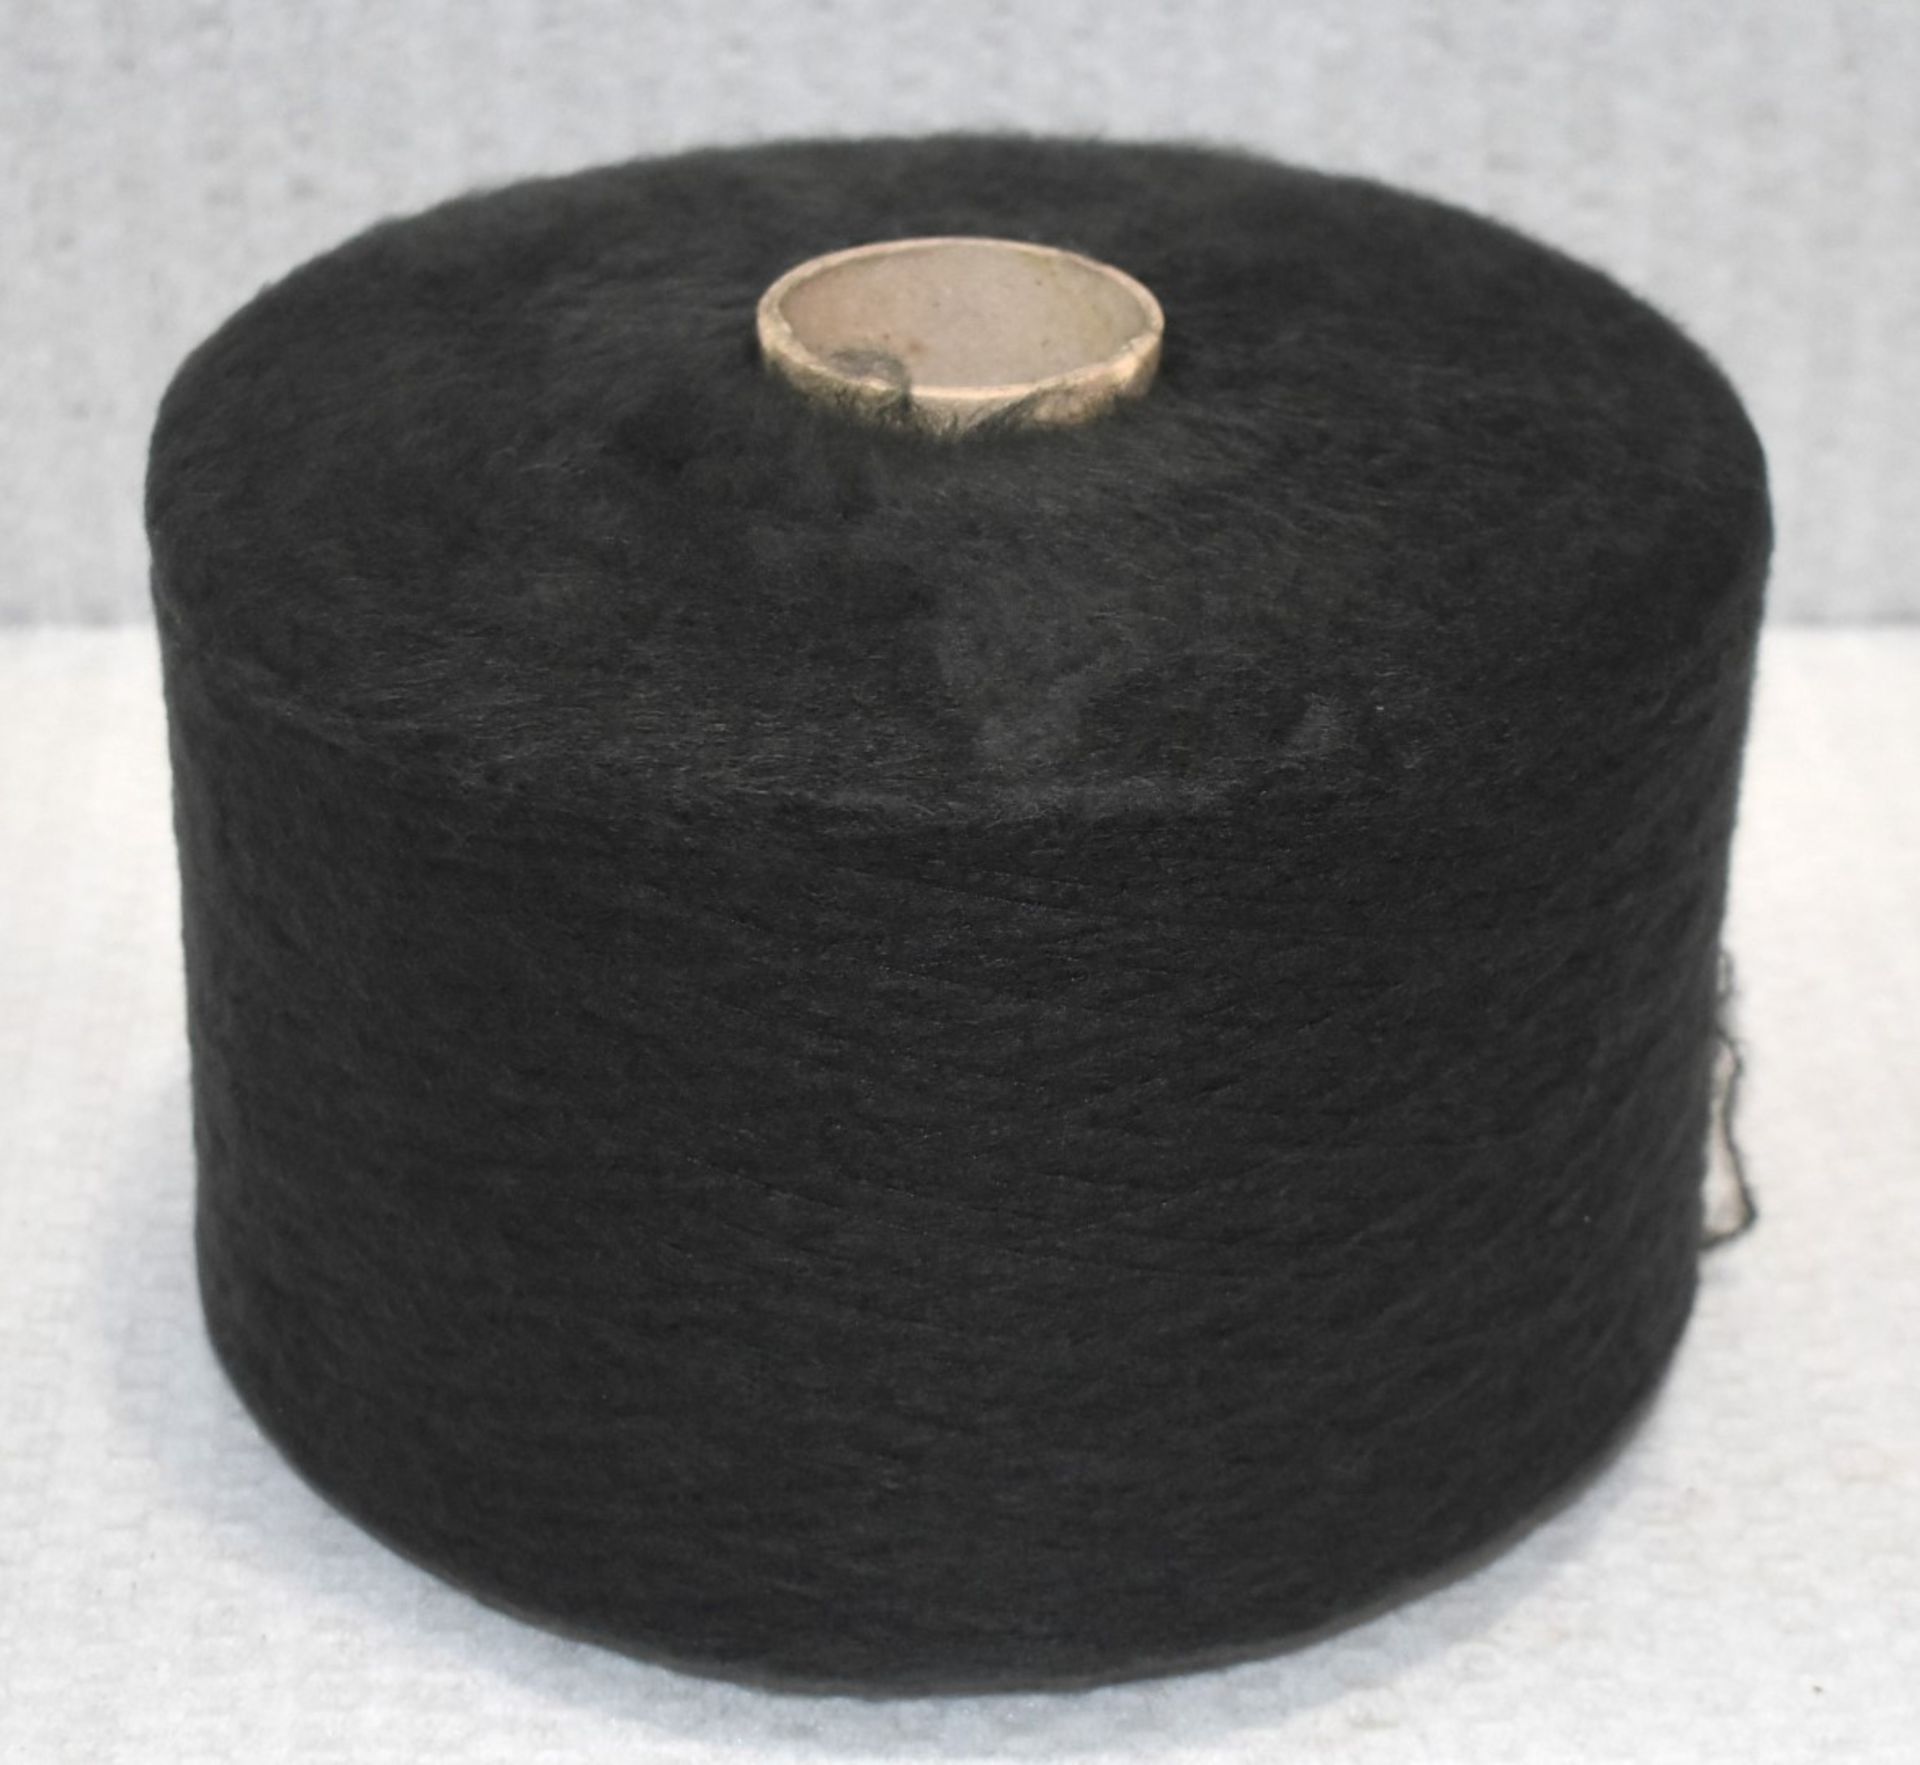 6 x Cones of 1/7,5 Lagona Knitting Yarn - Charcoal - Approx Weight: 2,300g - New Stock ABL Yarn - Image 6 of 11